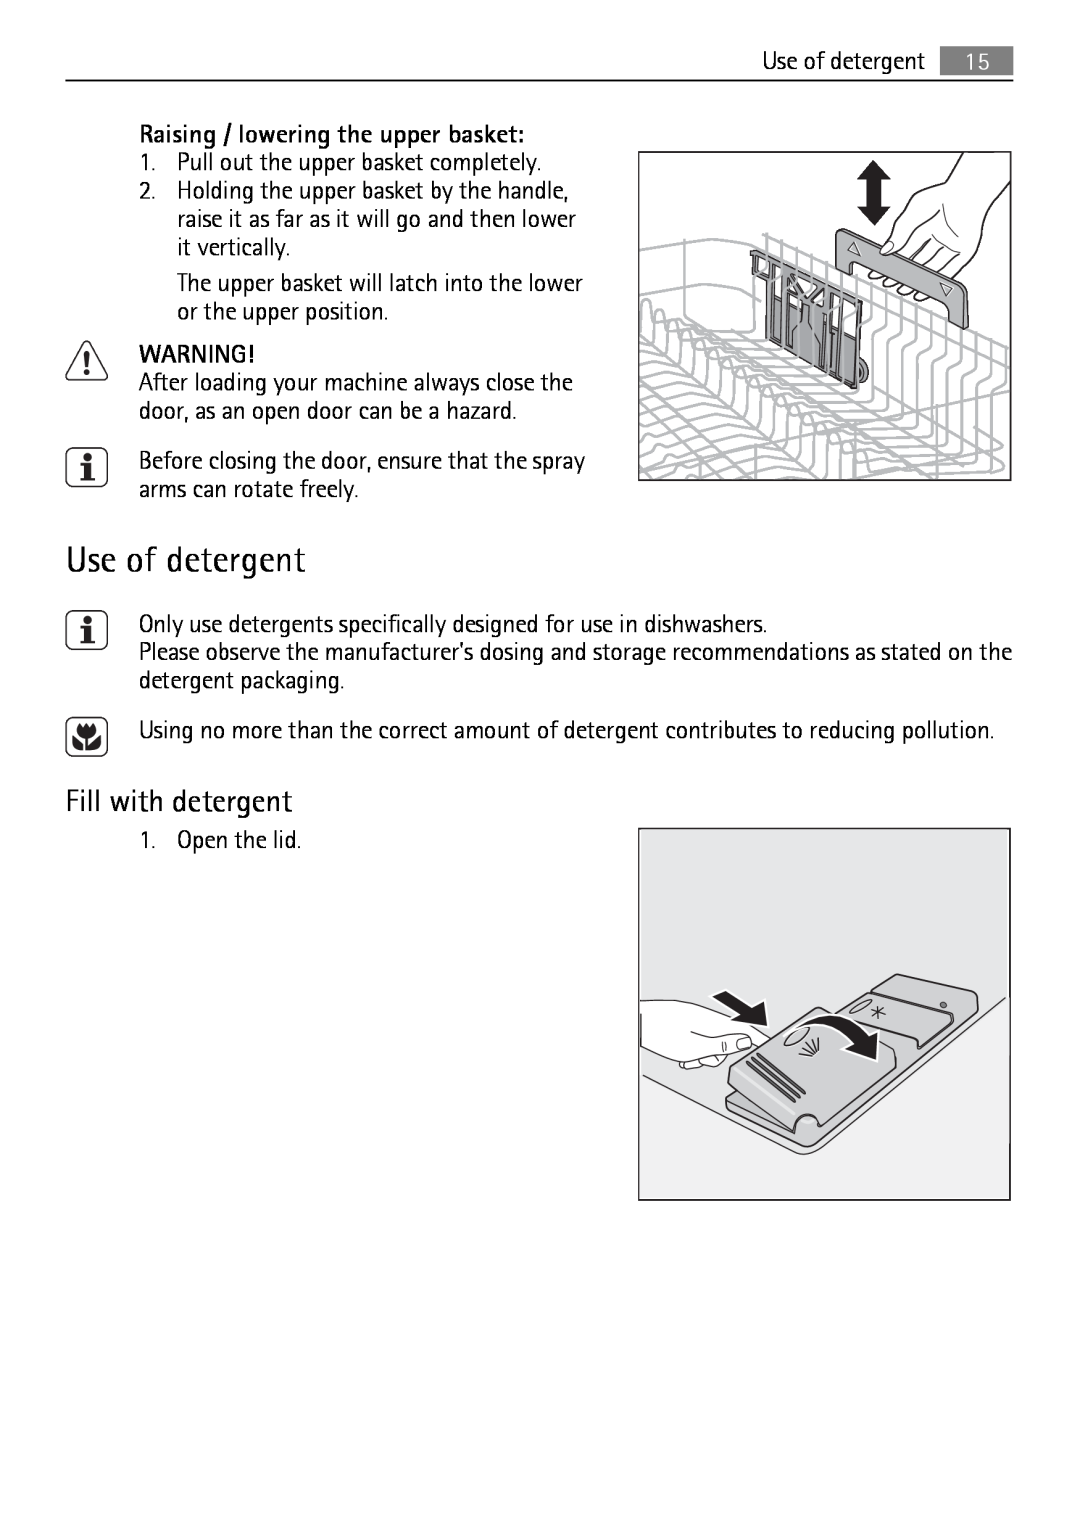 Electrolux QB 5201 user manual Use of detergent, Fill with detergent, Raising / lowering the upper basket 